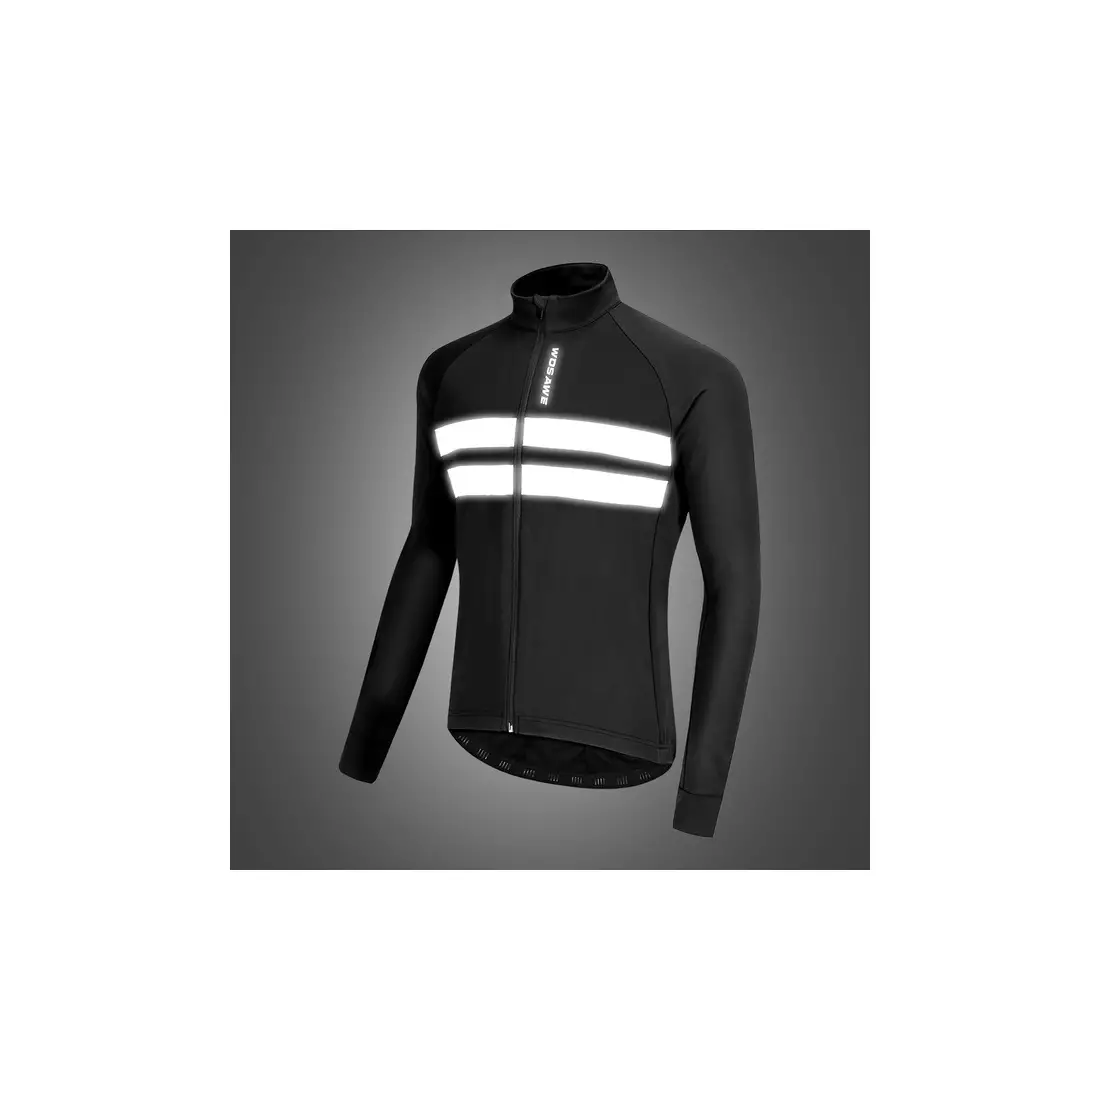 WOSAWE men's bicycle jacket Softshell slightly insulated, black BL231 